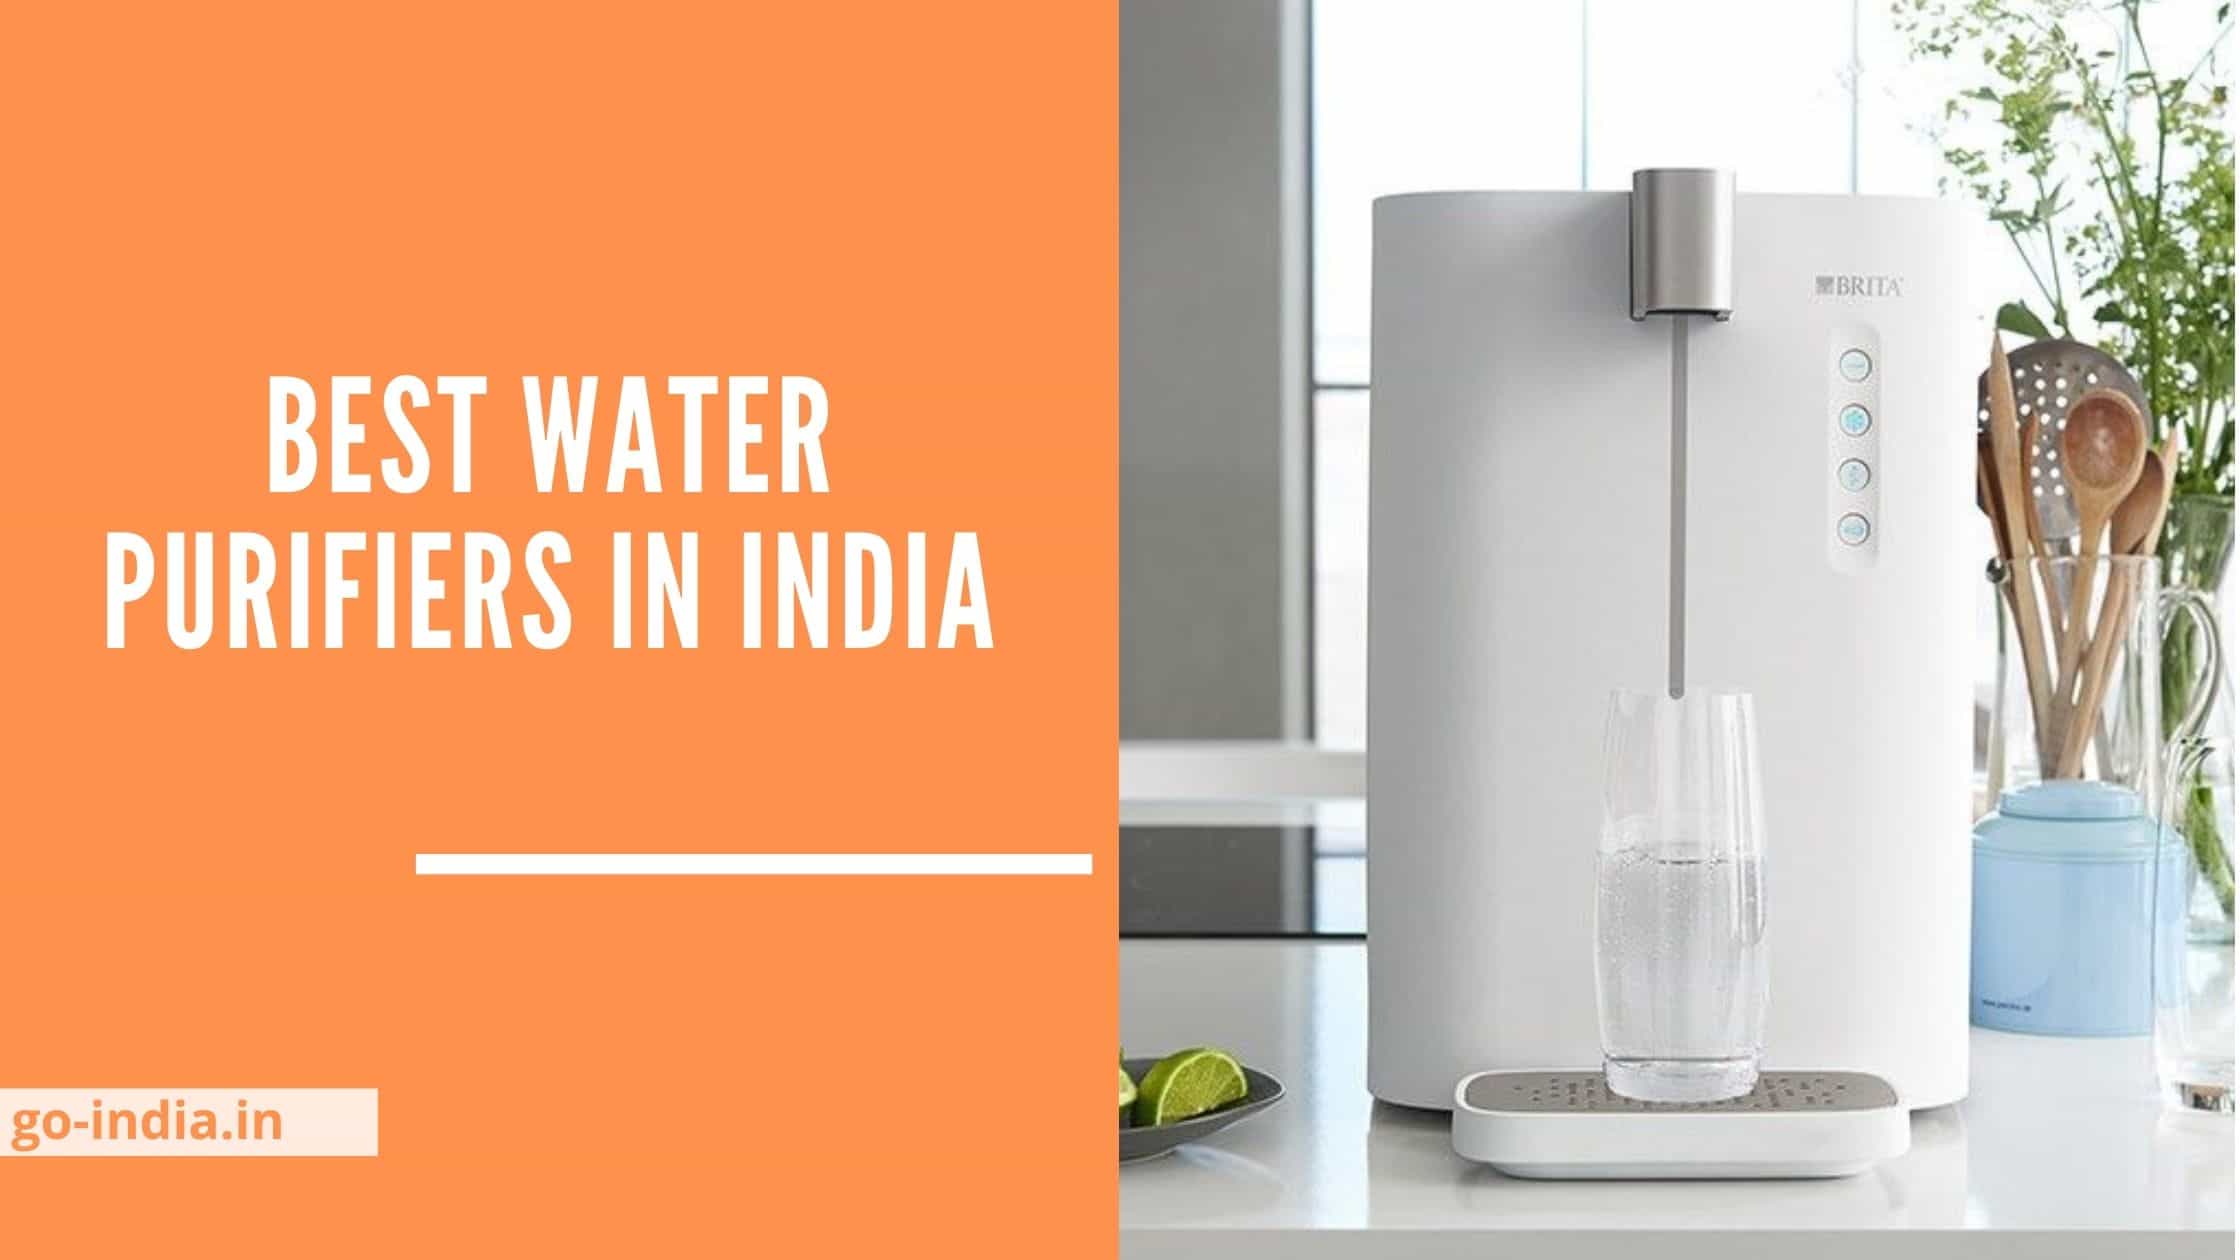 Top 10 Best Water Purifiers in India (2022)